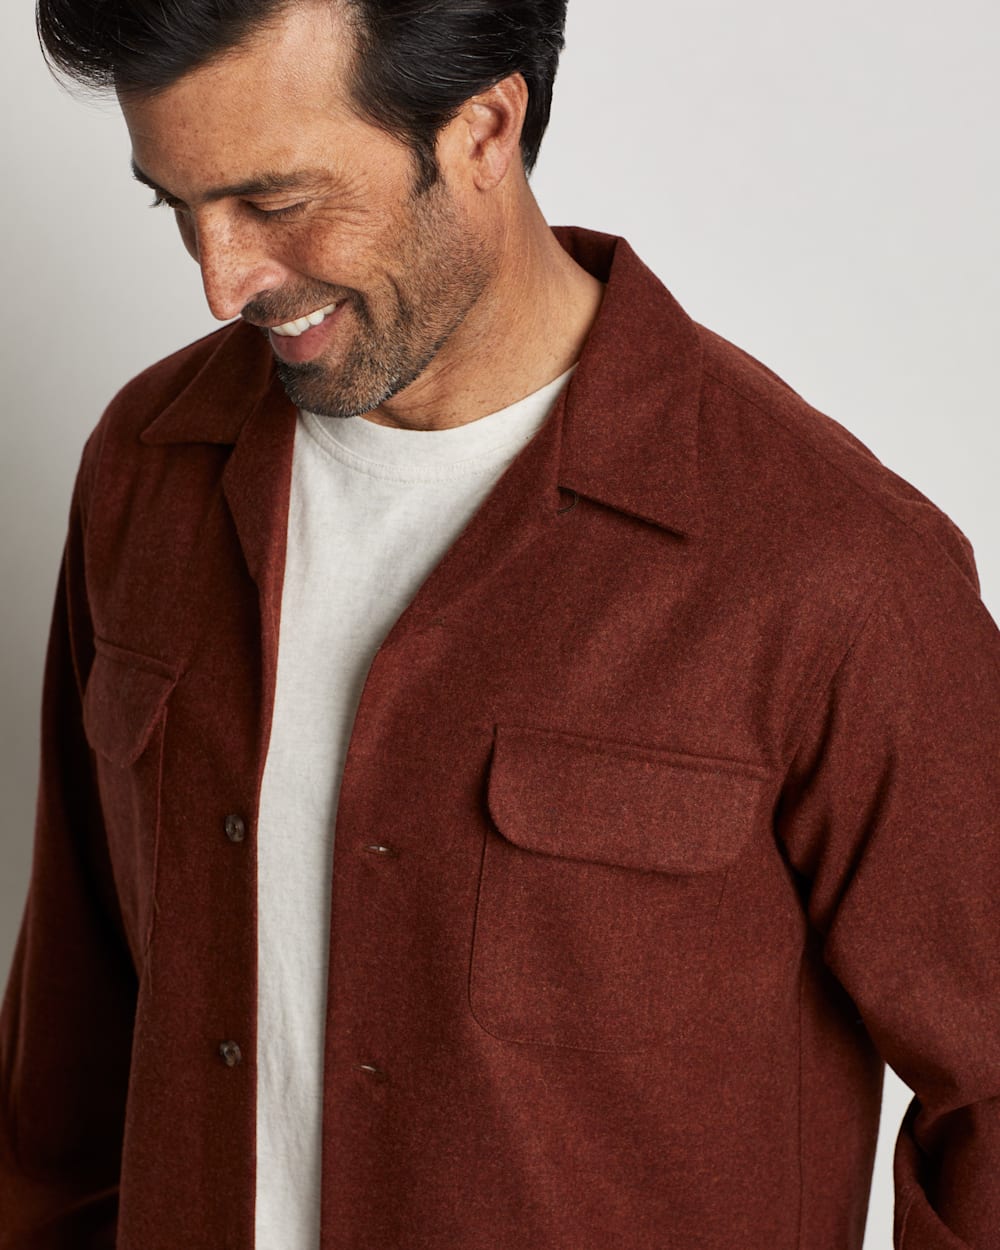 ALTERNATE VIEW OF MEN'S BOARD SHIRT IN RED MIX image number 3